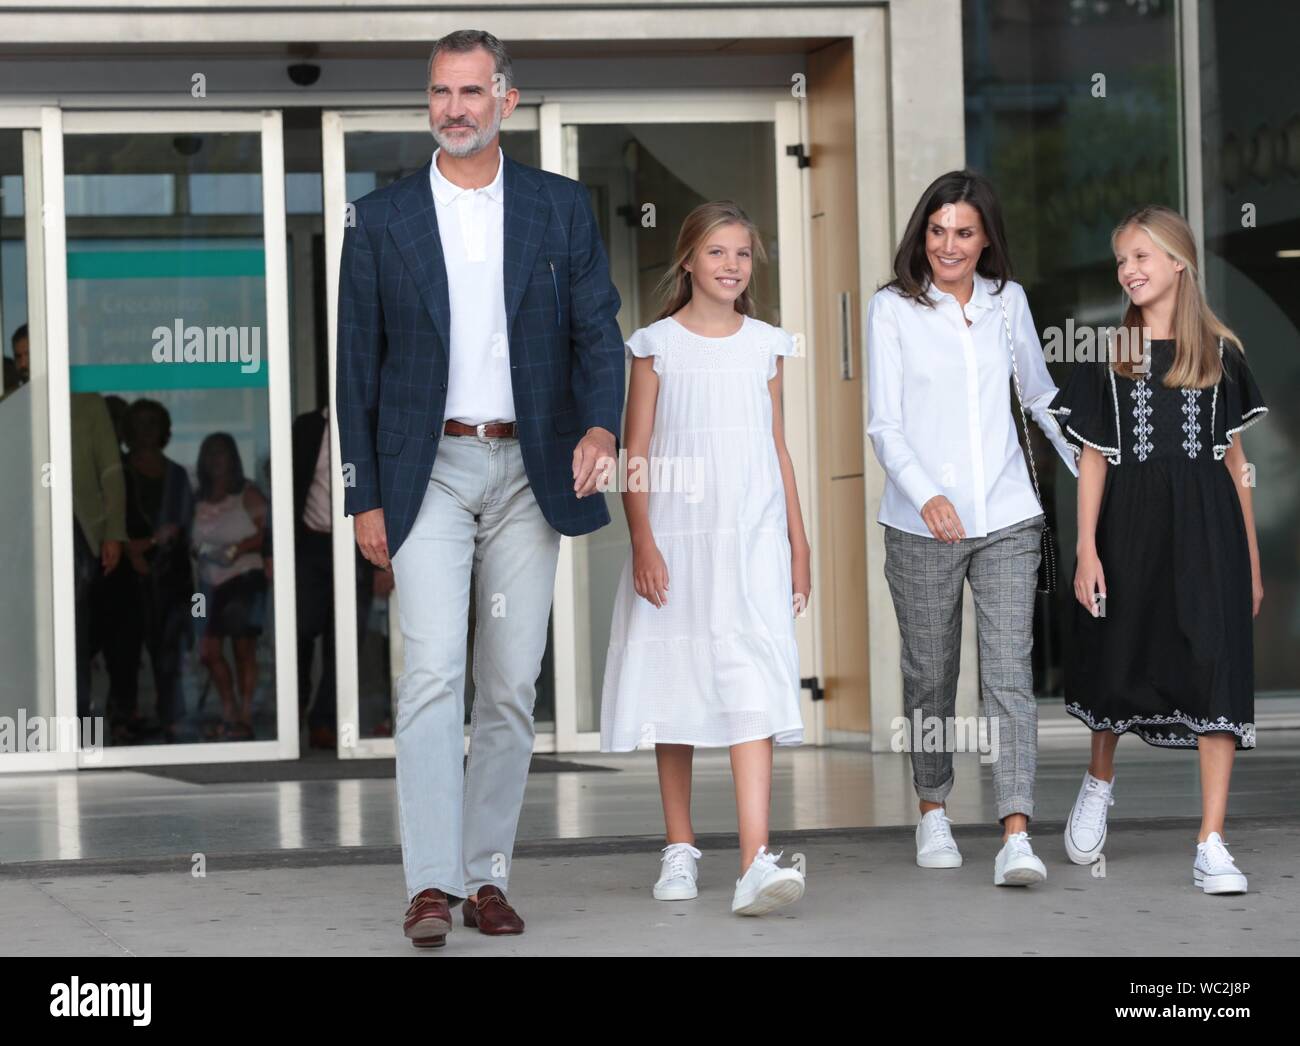 Madrid, Spain. 27th Aug, 2019. Felipe VI and Letizia Reyes de España speak with the press accompanied by their daughters Princess Leonor and the Infanta Sofia in the hospital after visiting King Juan Carlos I, who is recovering from an open heart operation. Credit: dpa picture alliance/Alamy Live News Stock Photo